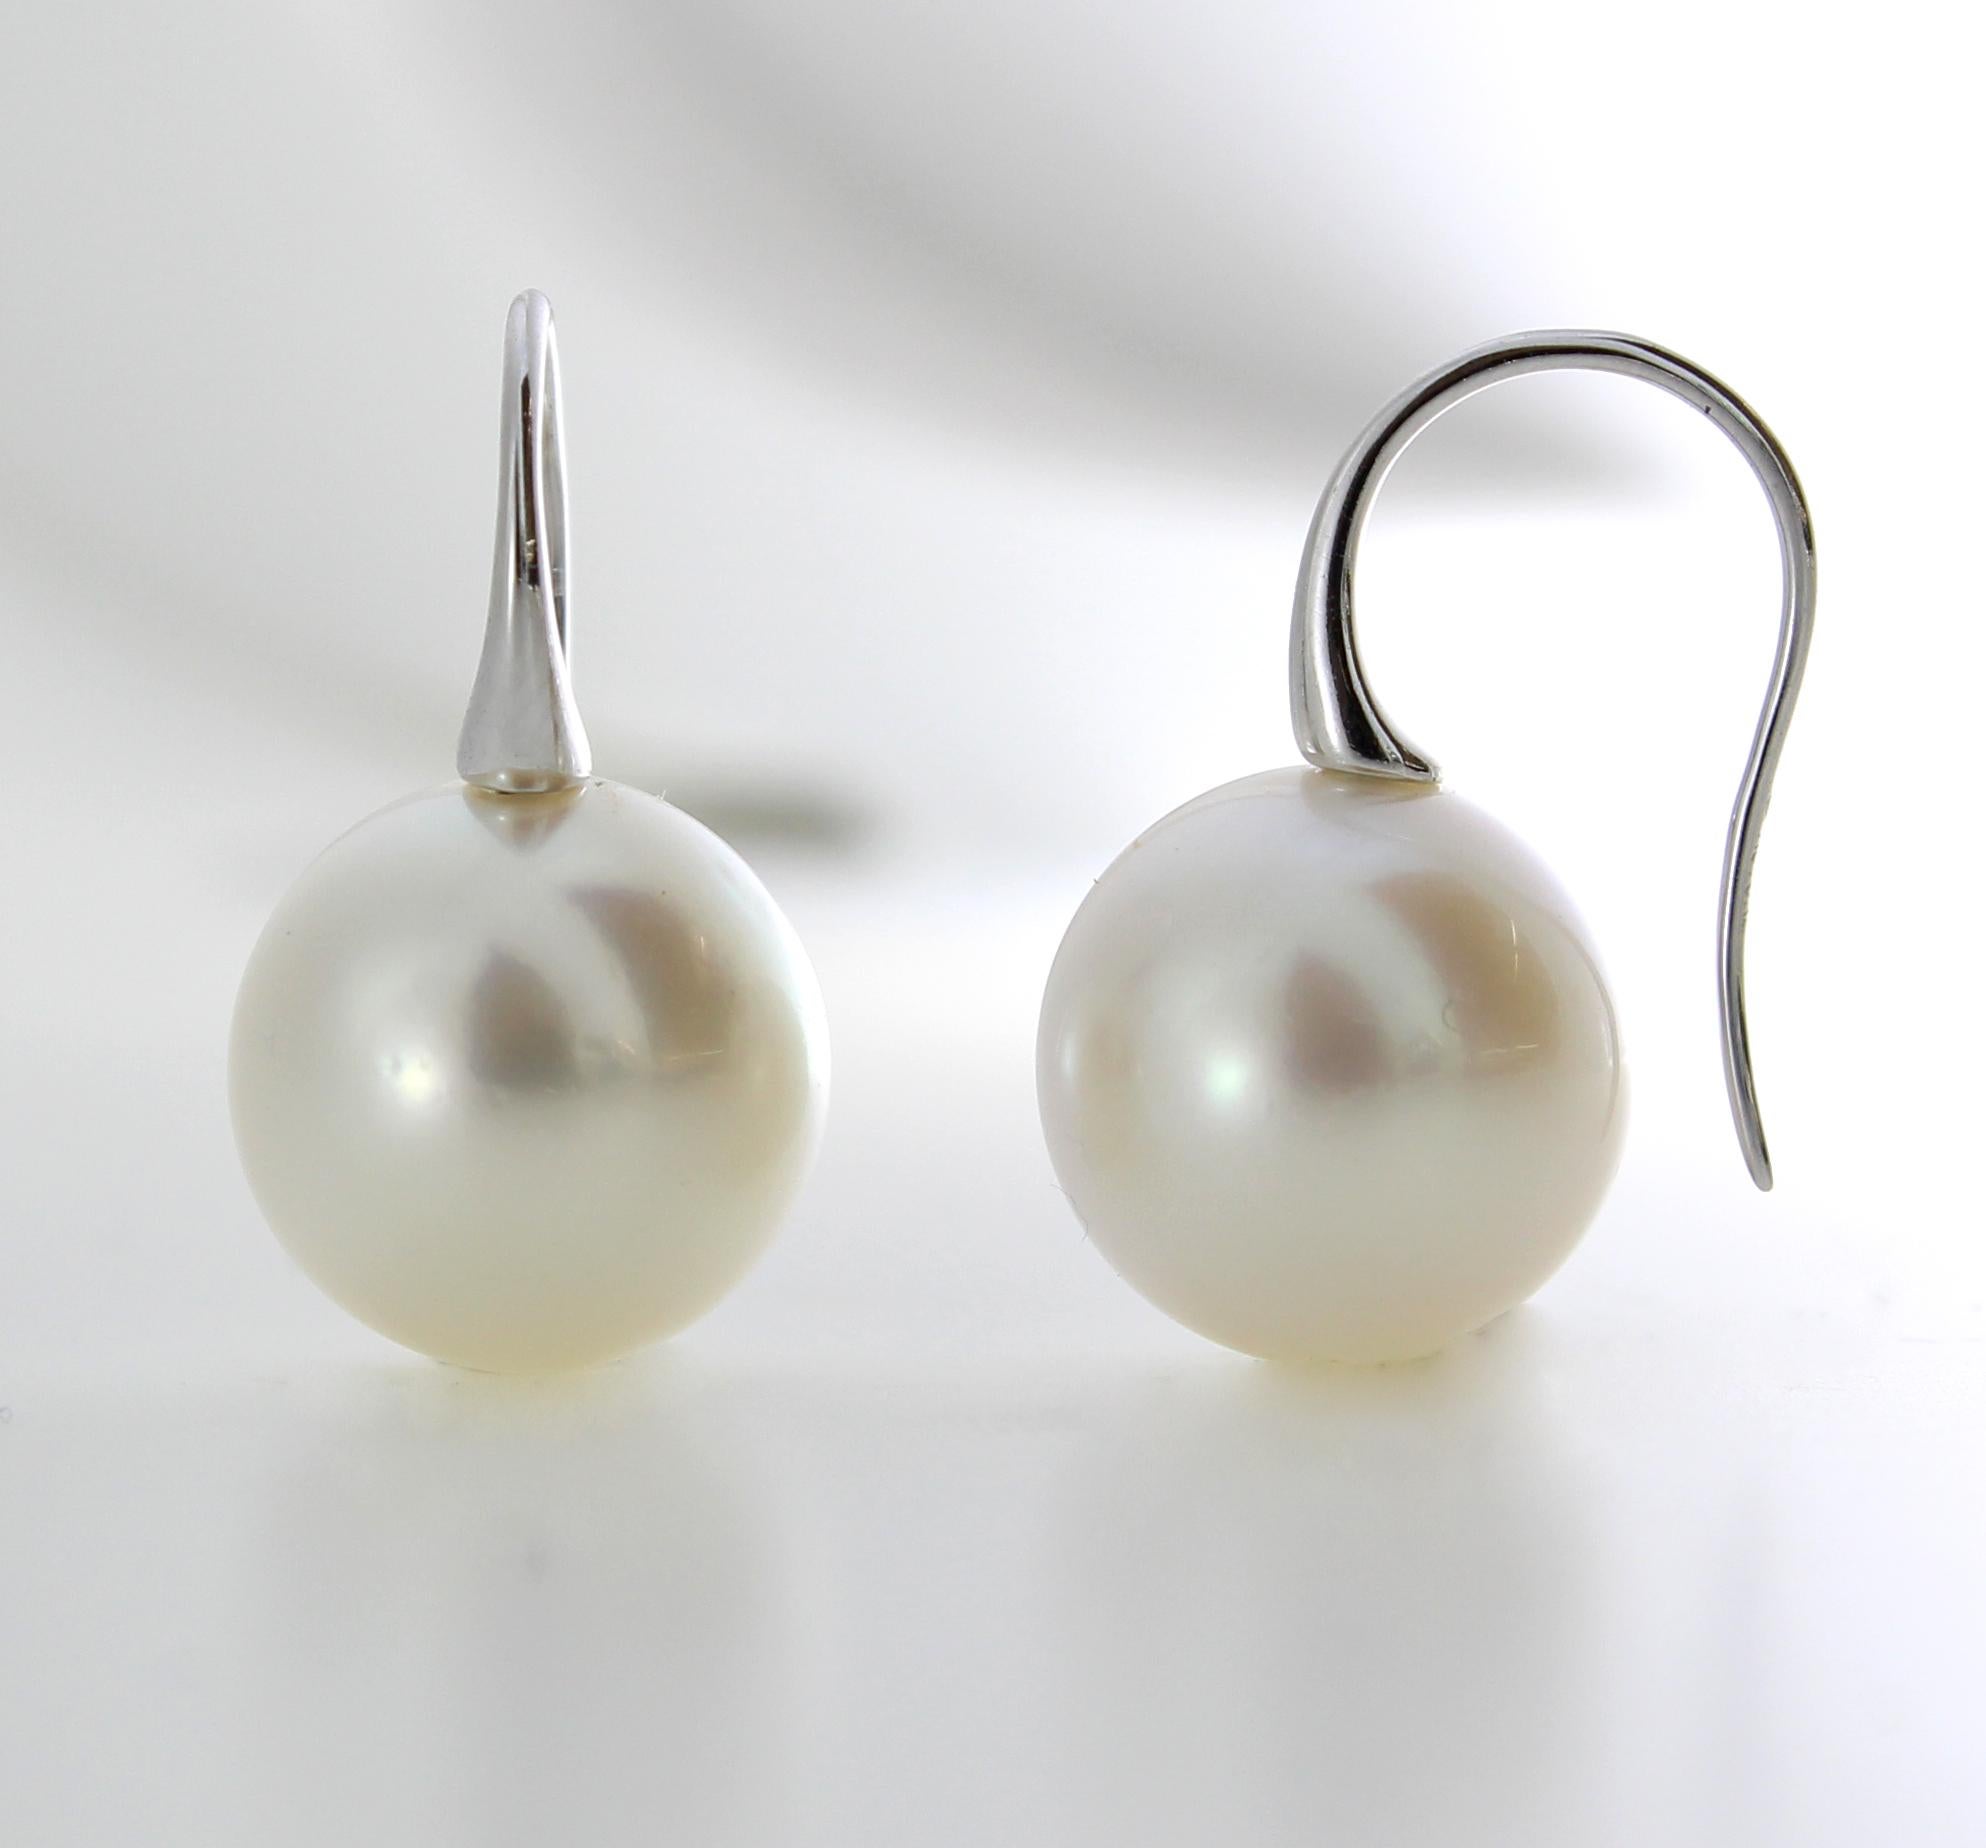 18k White Gold with 12mm White Round Near Round South Sea Pearls